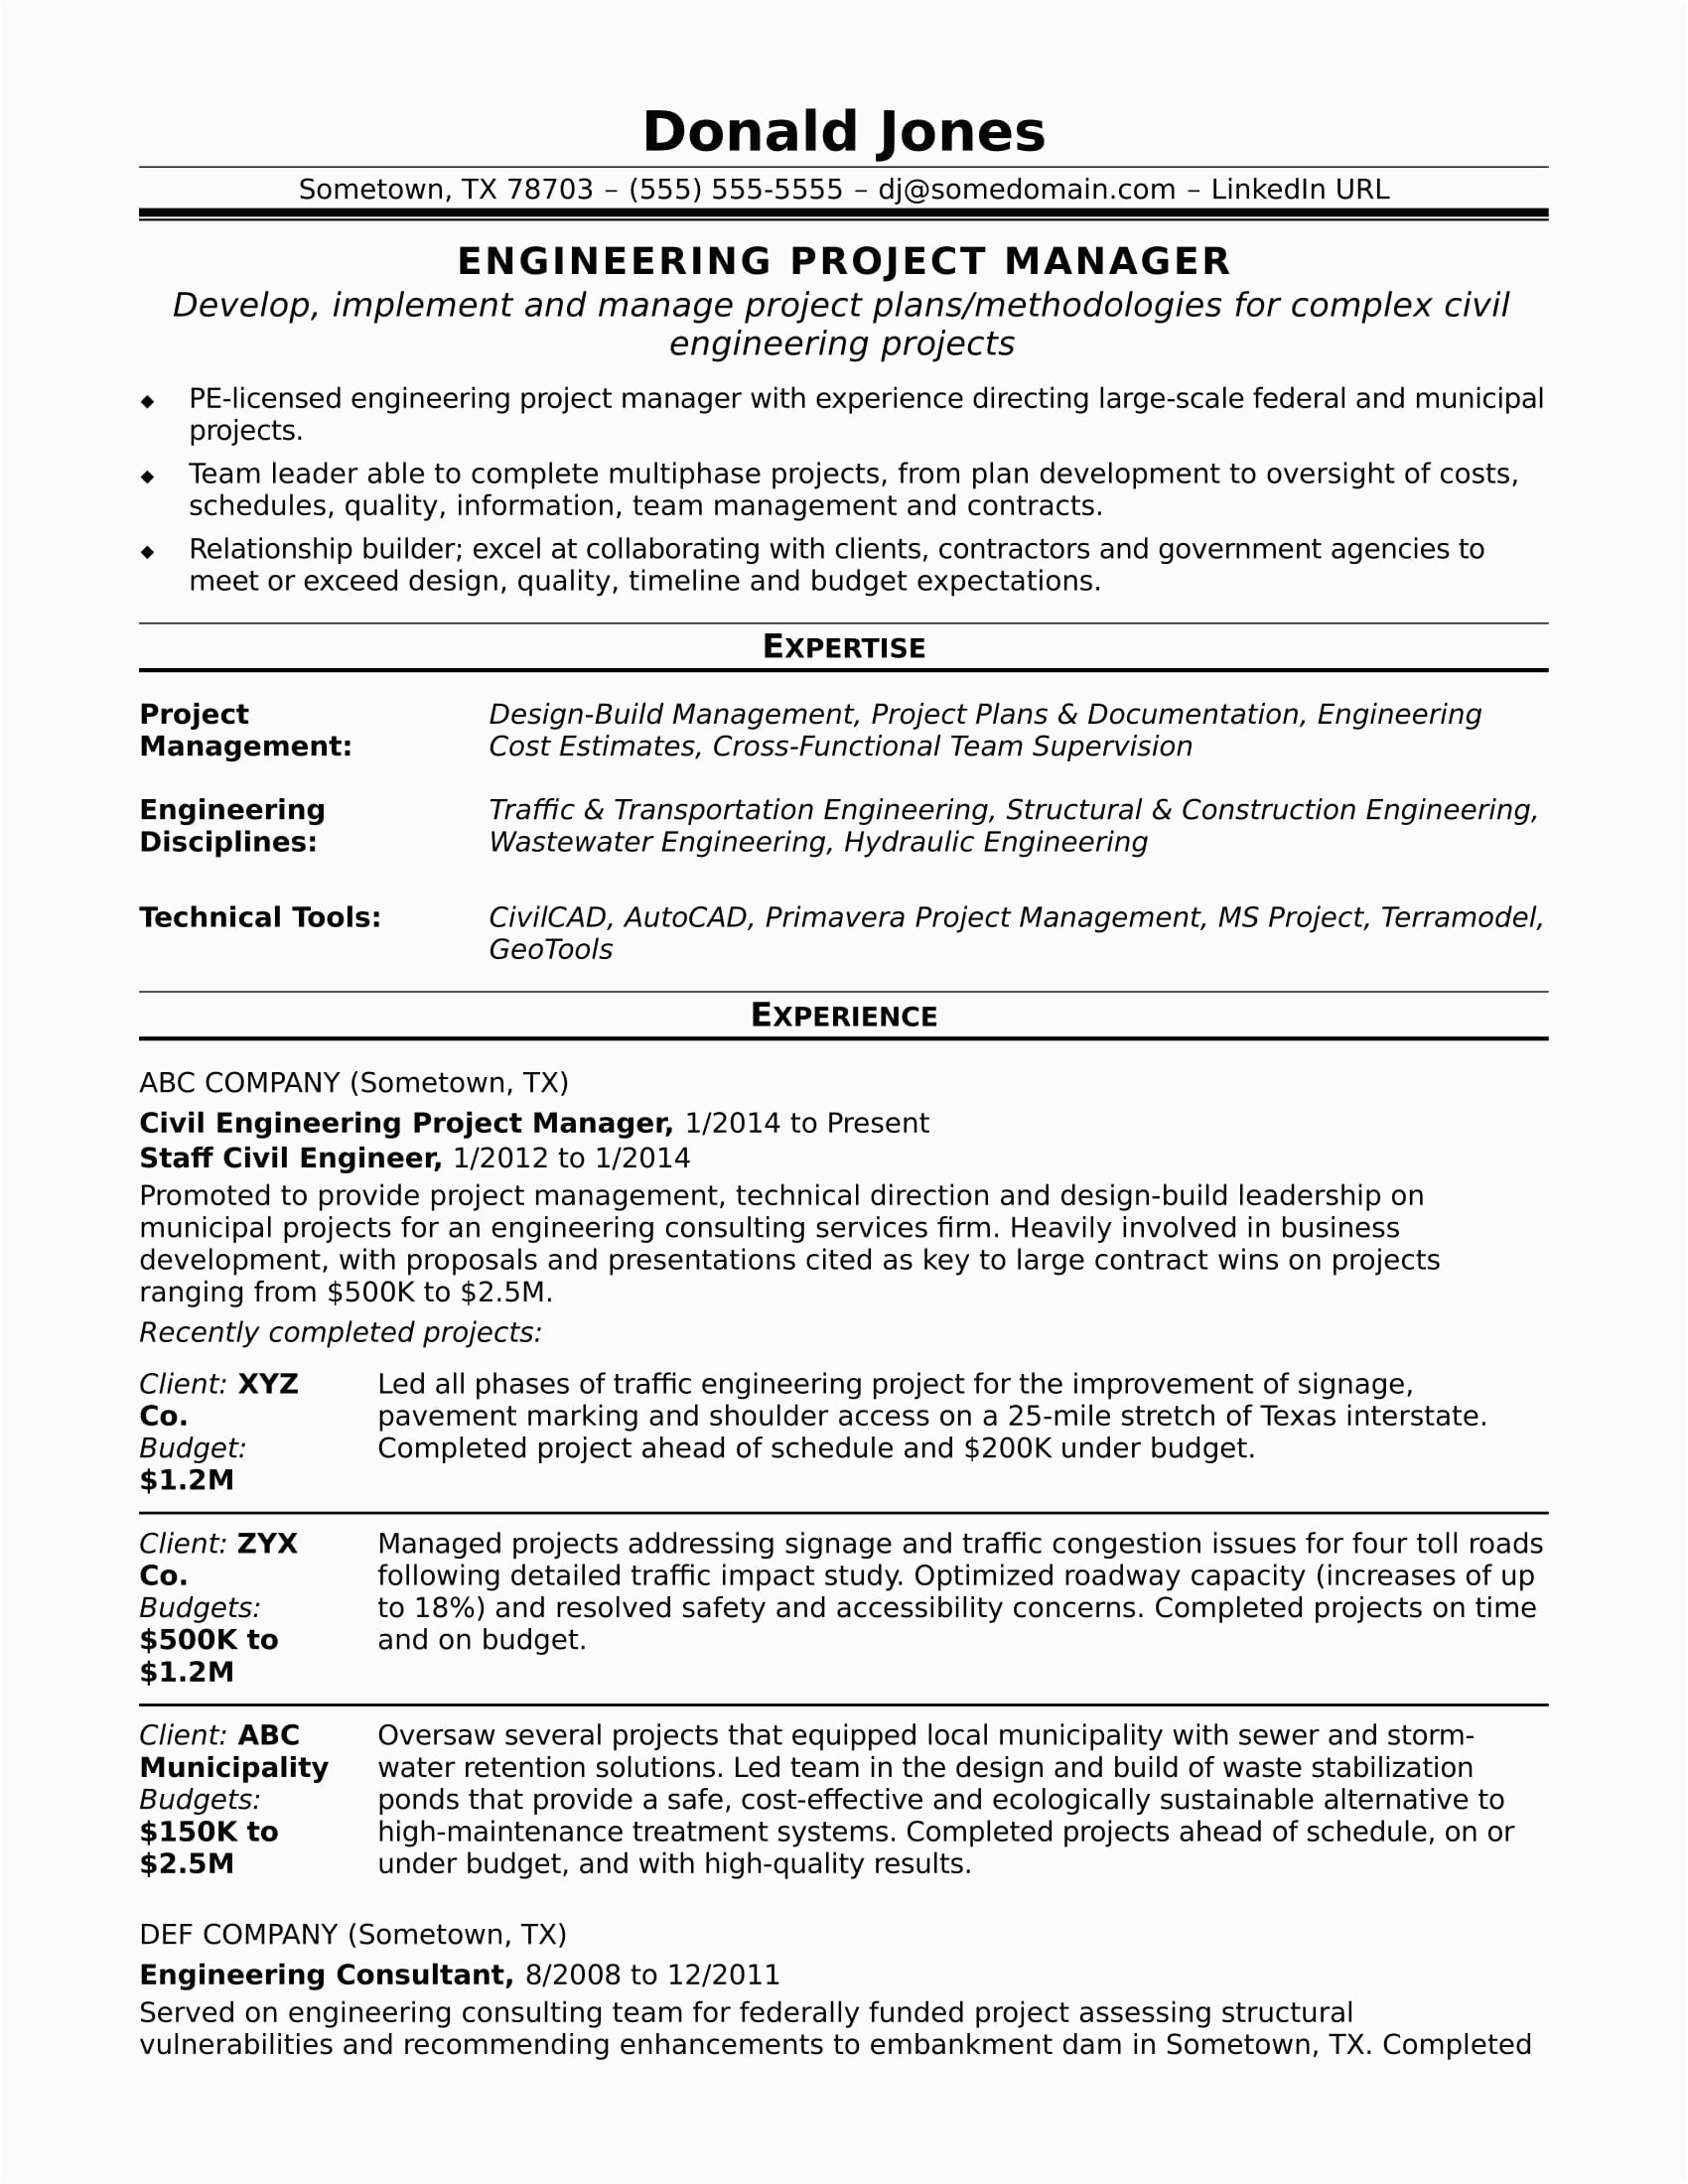 sample resume engineering project manager midlevel